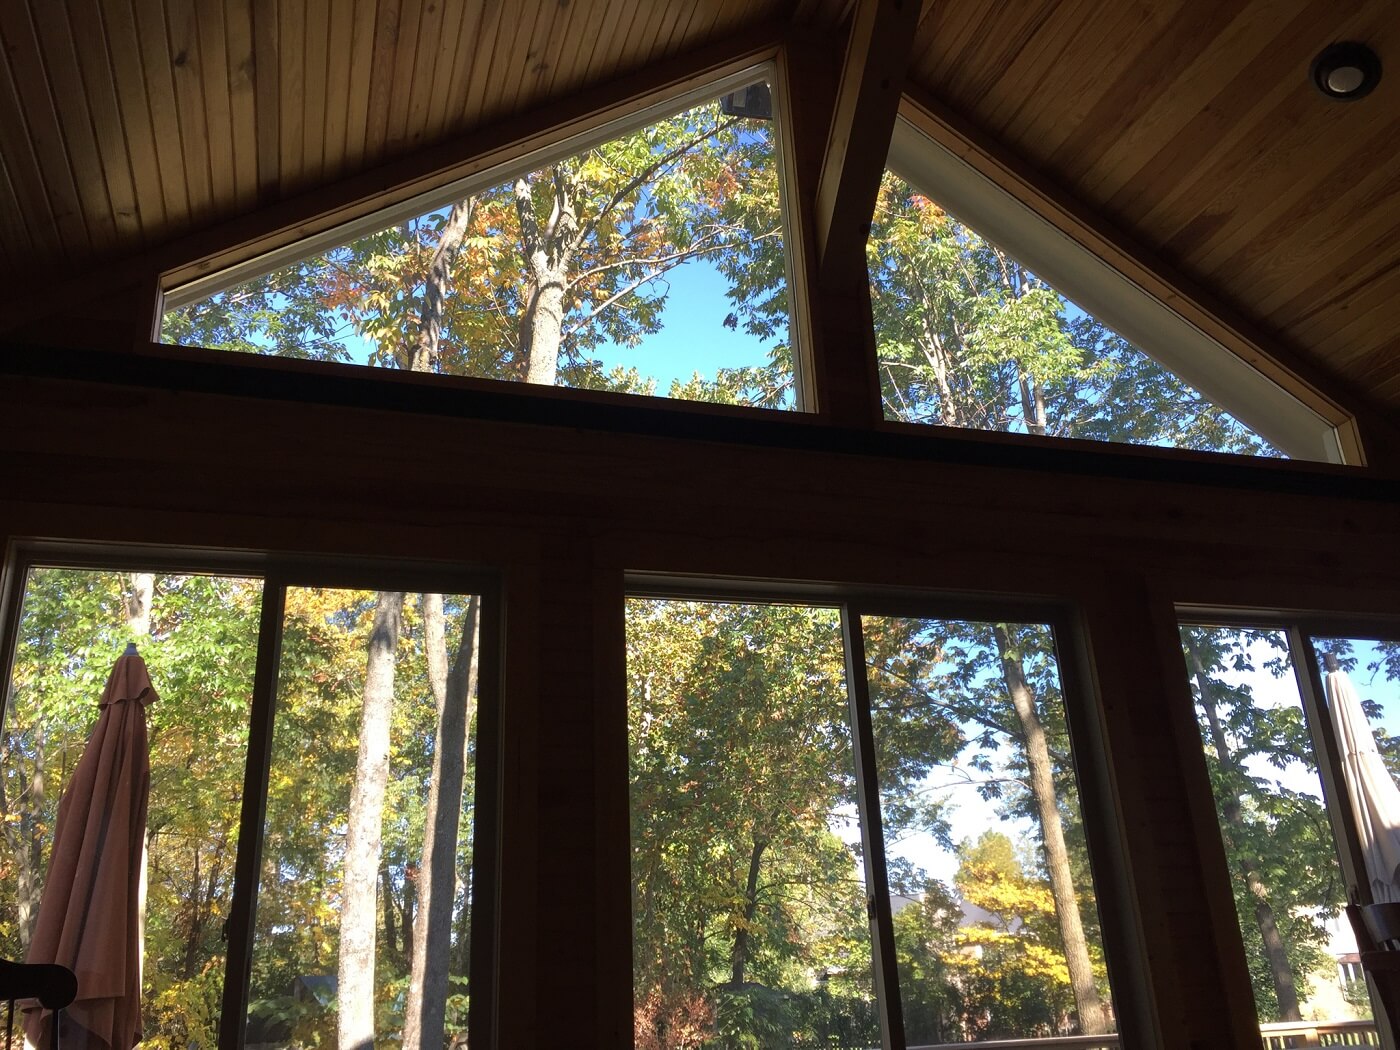 View of a wooded property from inside a sunroom with wood beams and wooden vaulted ceilings